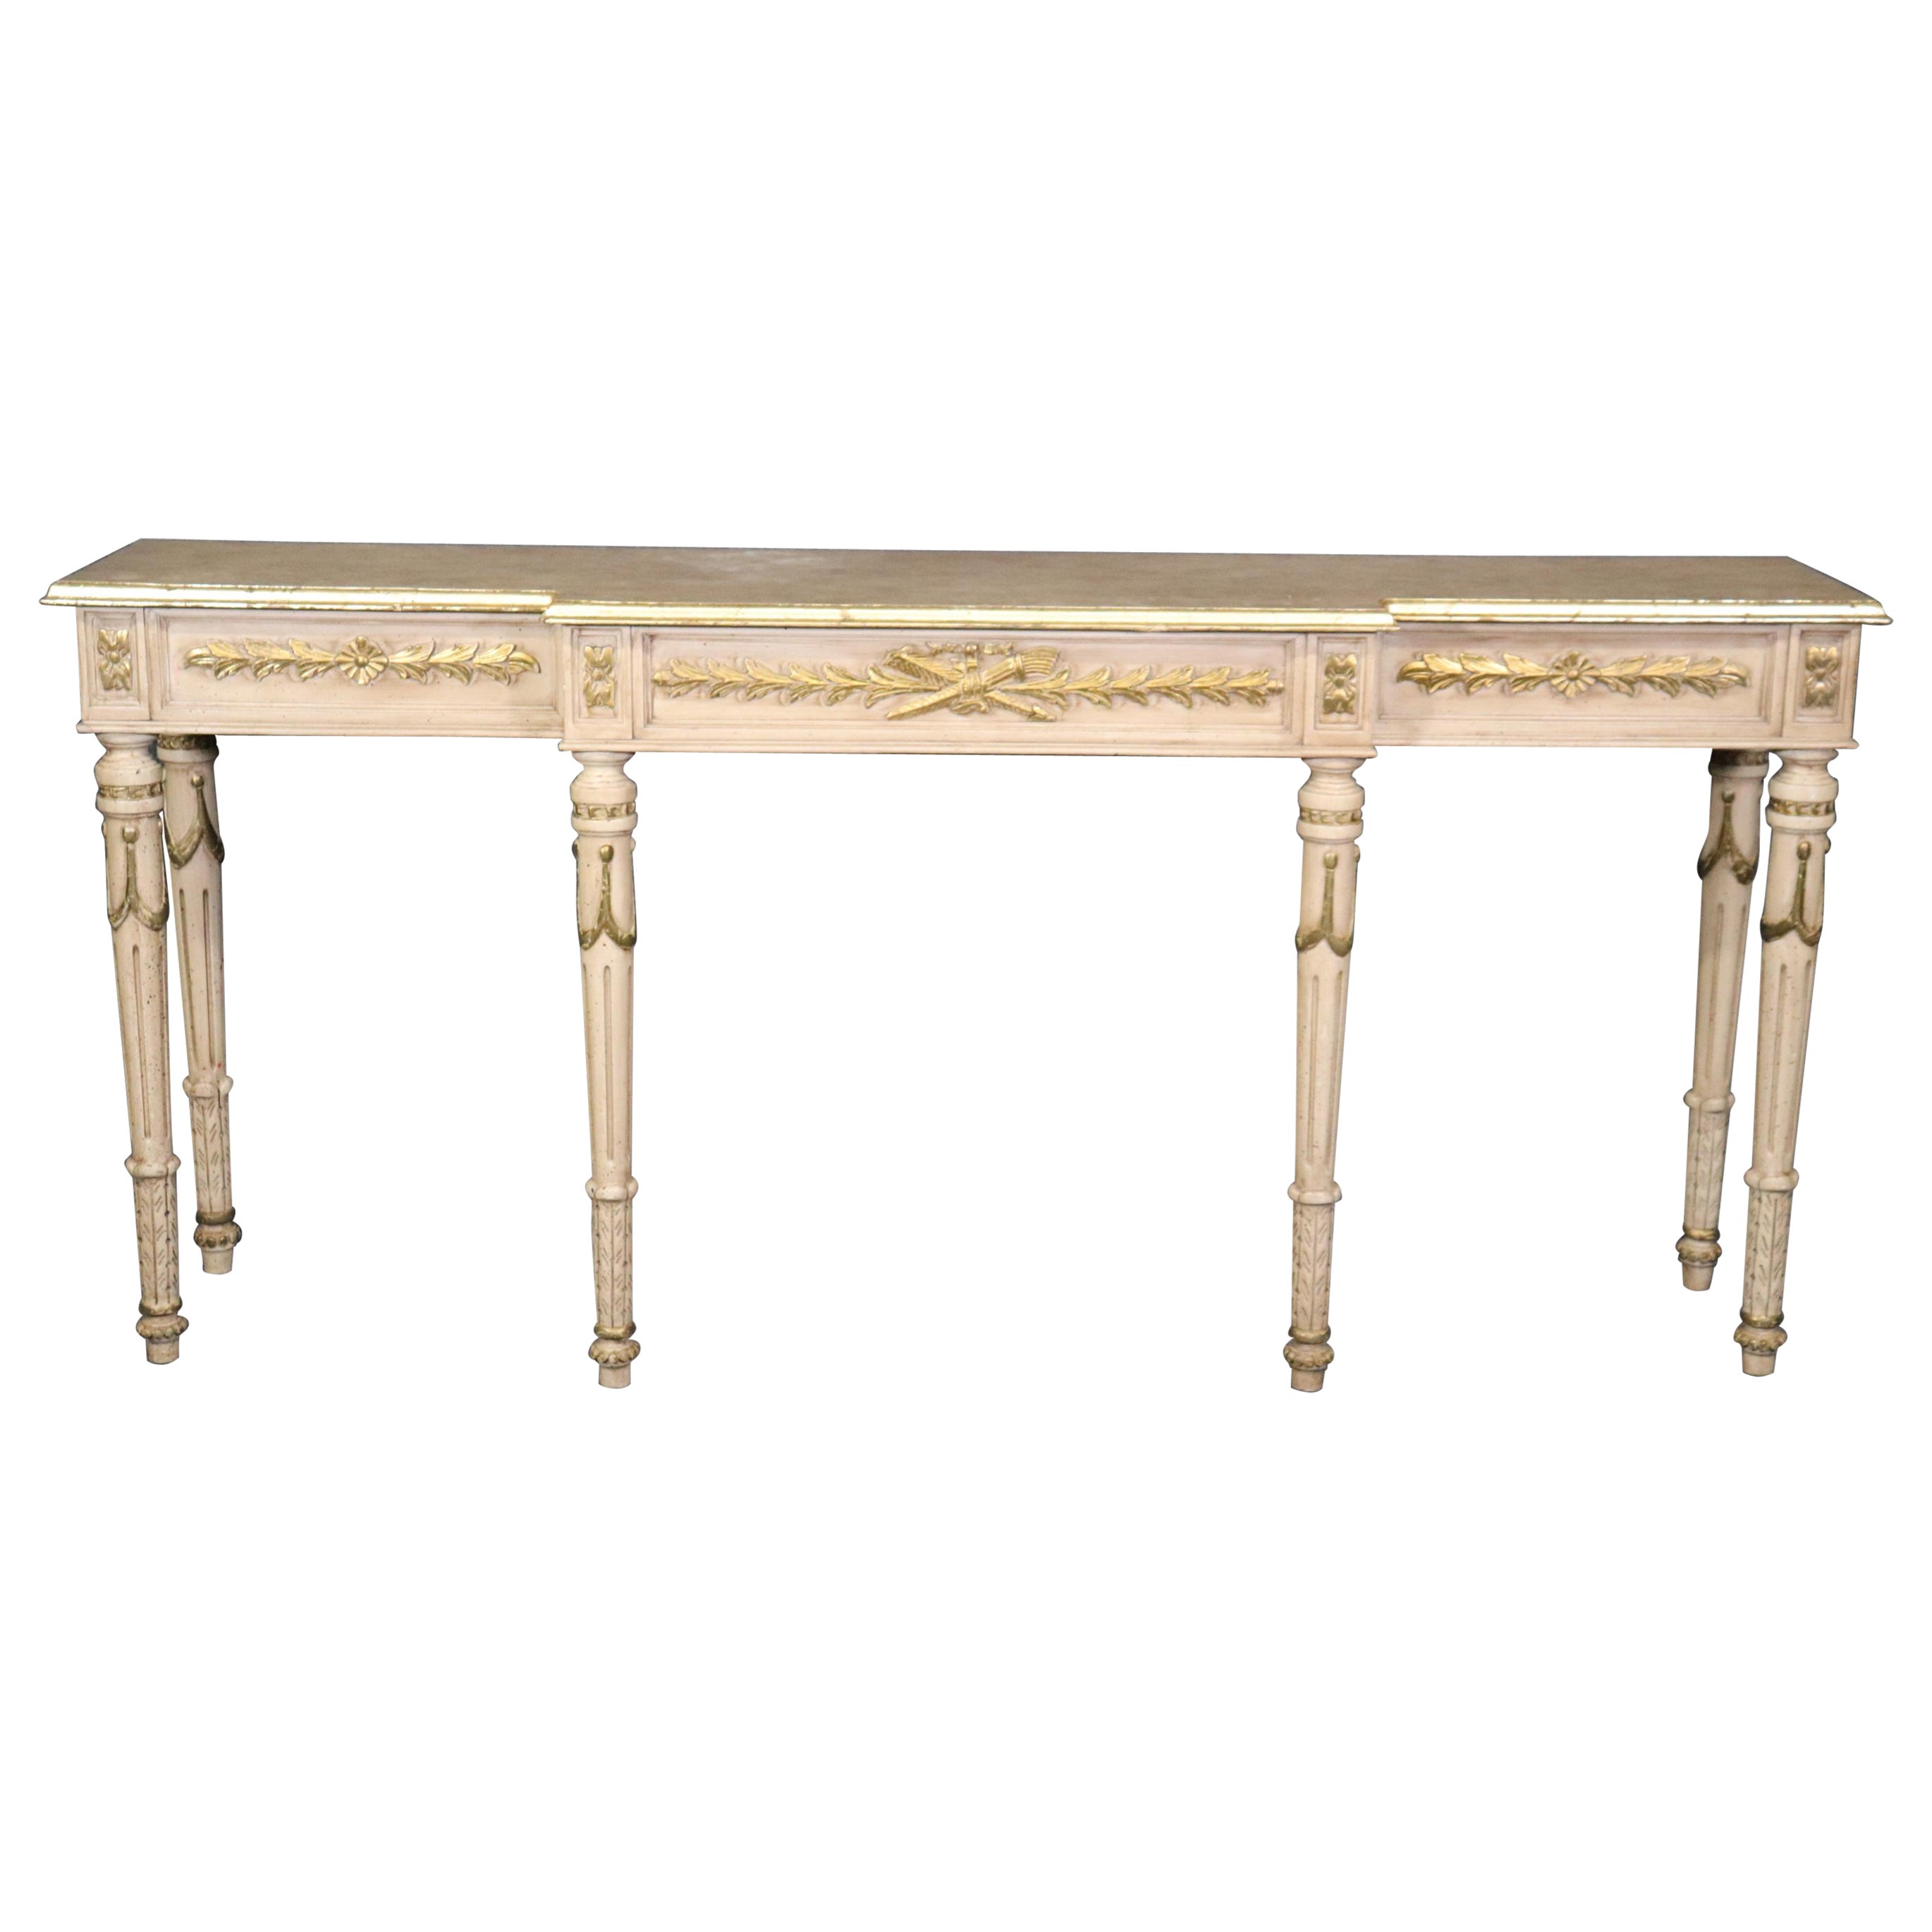 French Louis XVI Style Gilded and Faux Marble Paint Decorated Console Table 